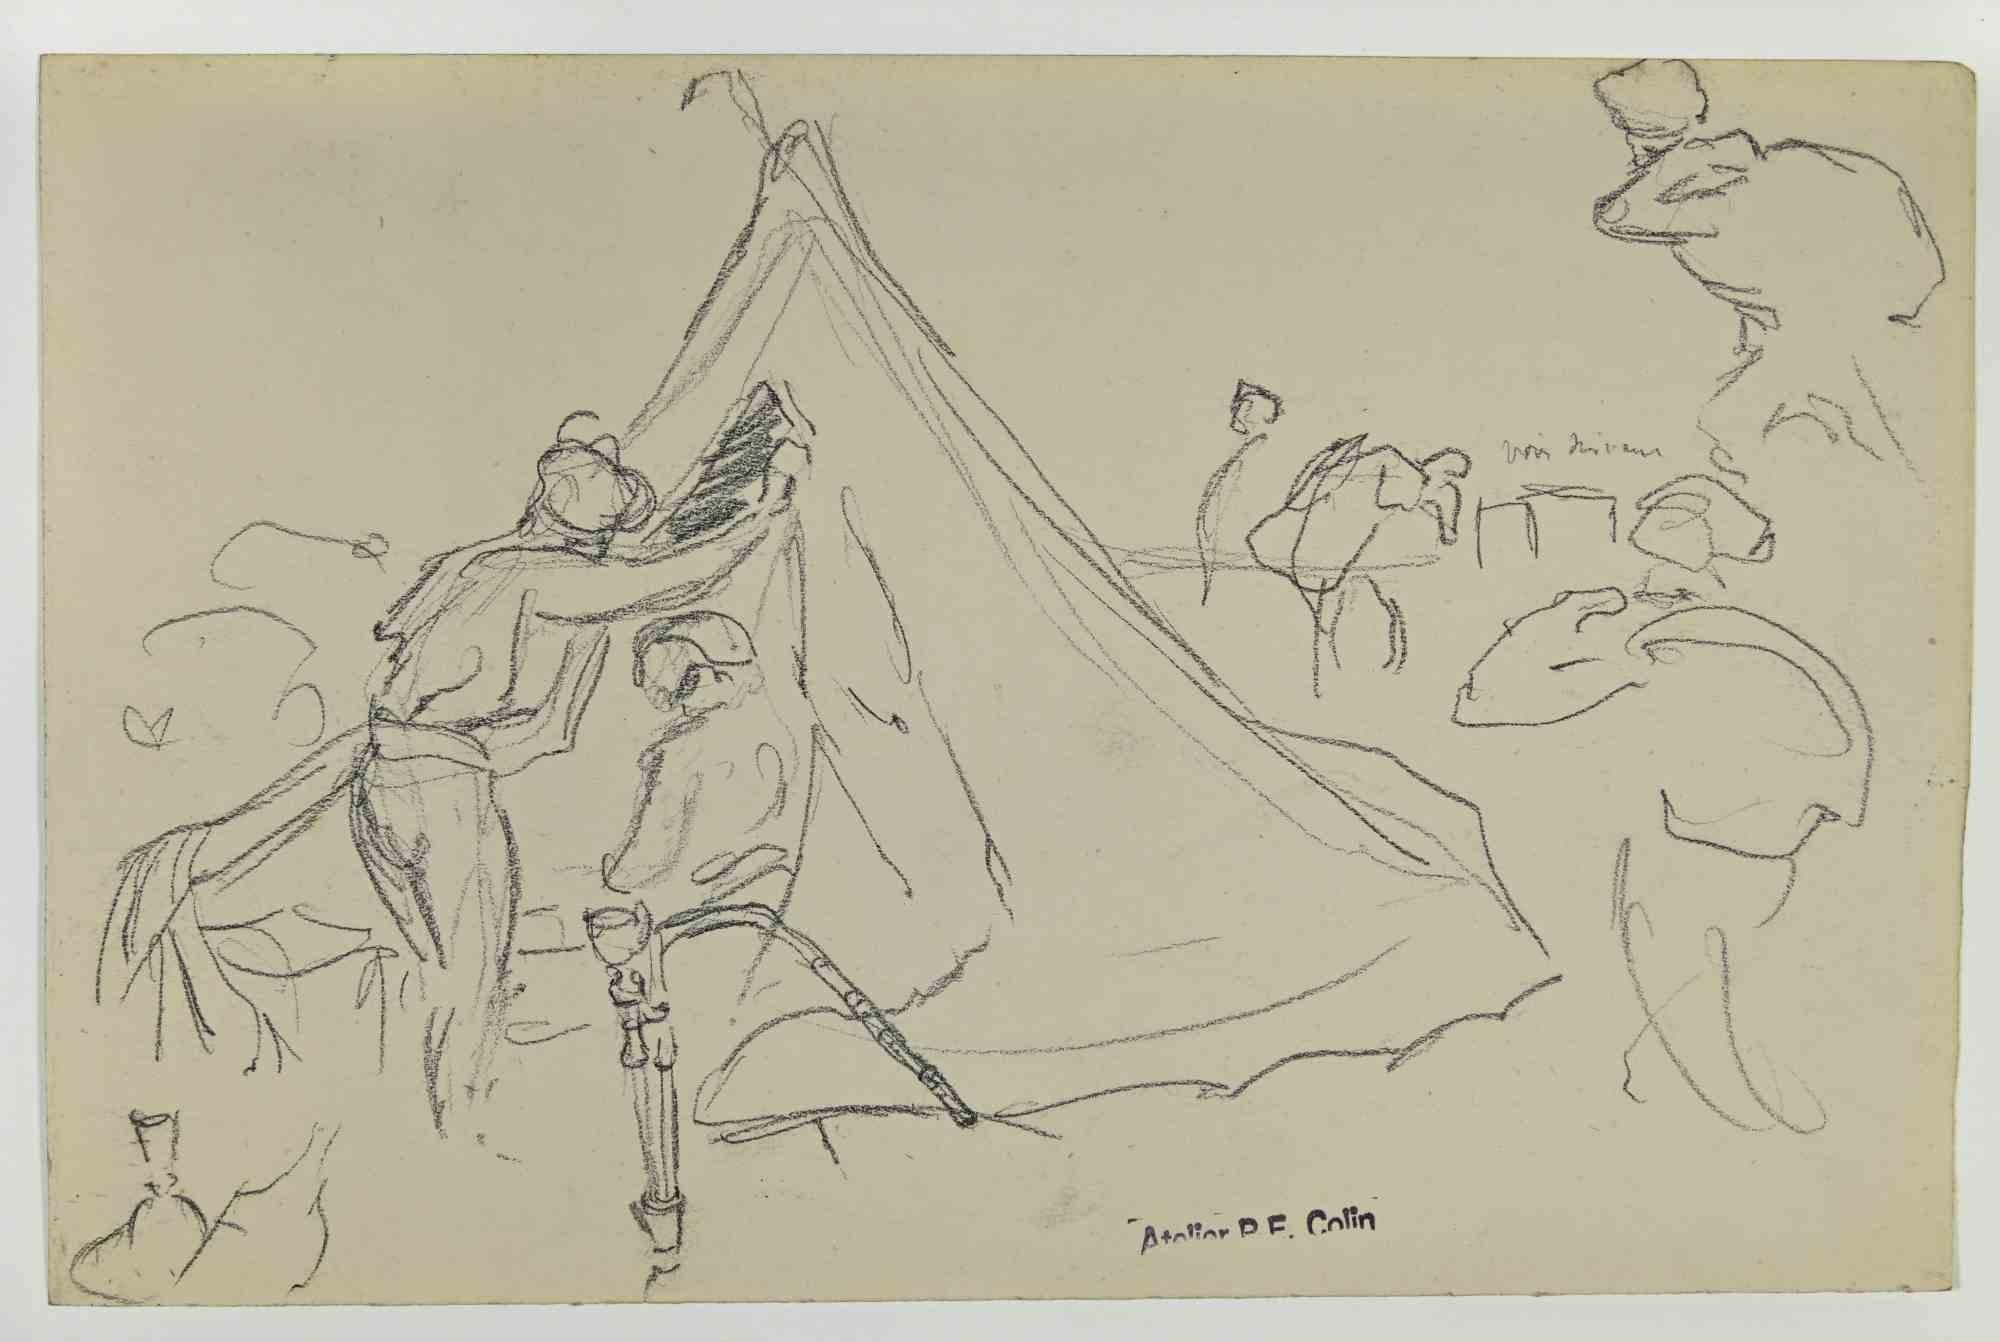 Soldiers In the Tent is a drawing realized by Paul Emile Colin in the Early 20th Century.

Carbon Pencil on ivory-colored paper

Stamped on the lower.

Good conditions with slight foxing.

The artwork is realized through deft expressive strokes.